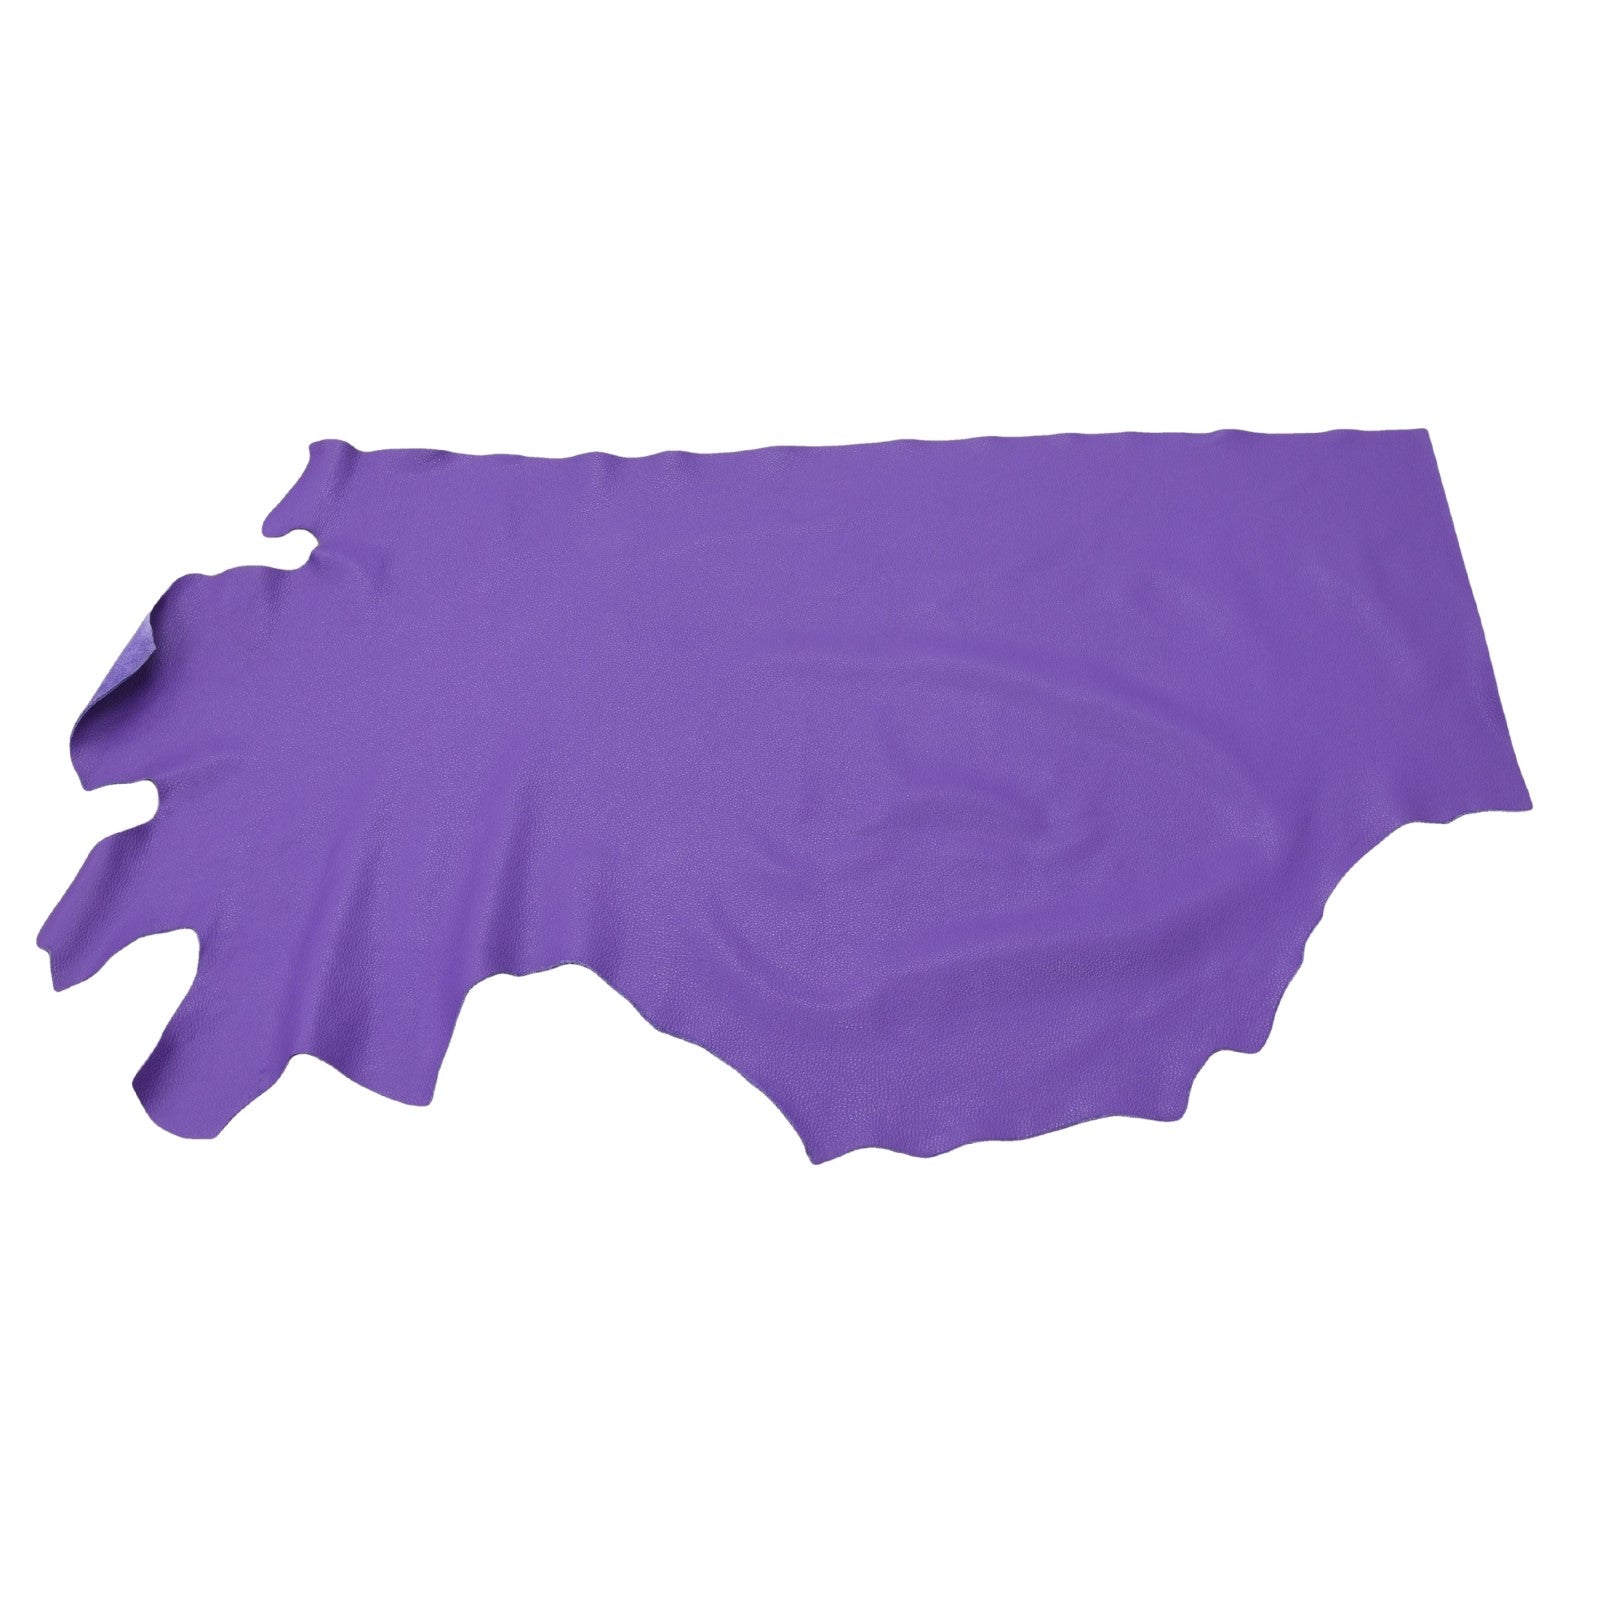 Viking Skol Purple Tried n True 3-4 oz Leather Cow Hides, Bottom Piece / 6.5-7.5 Sq Ft | The Leather Guy